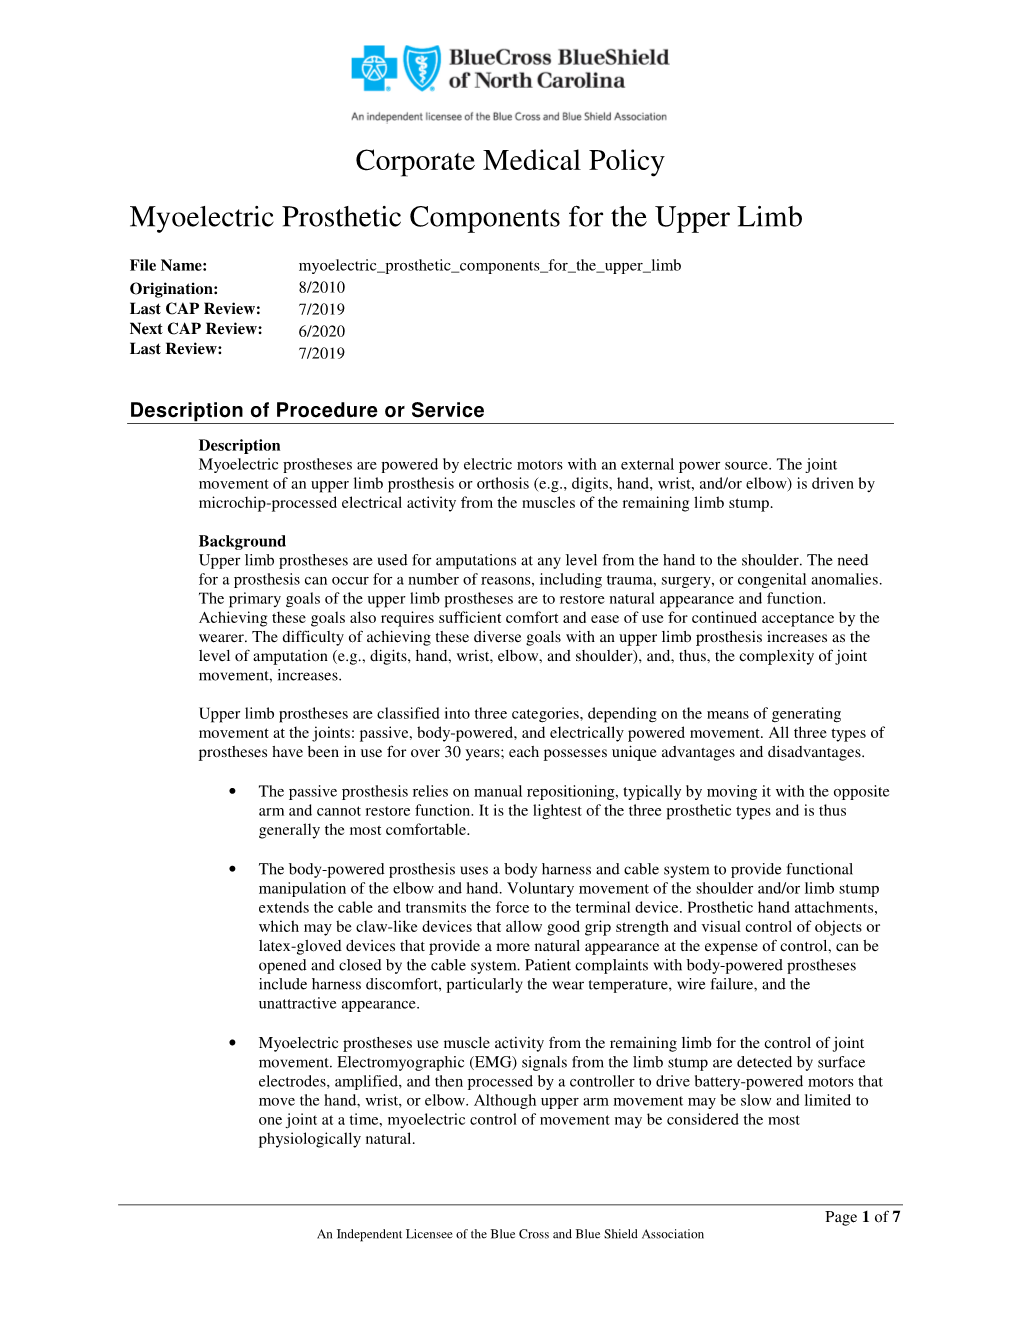 Corporate Medical Policy Myoelectric Prosthetic Components for the Upper Limb